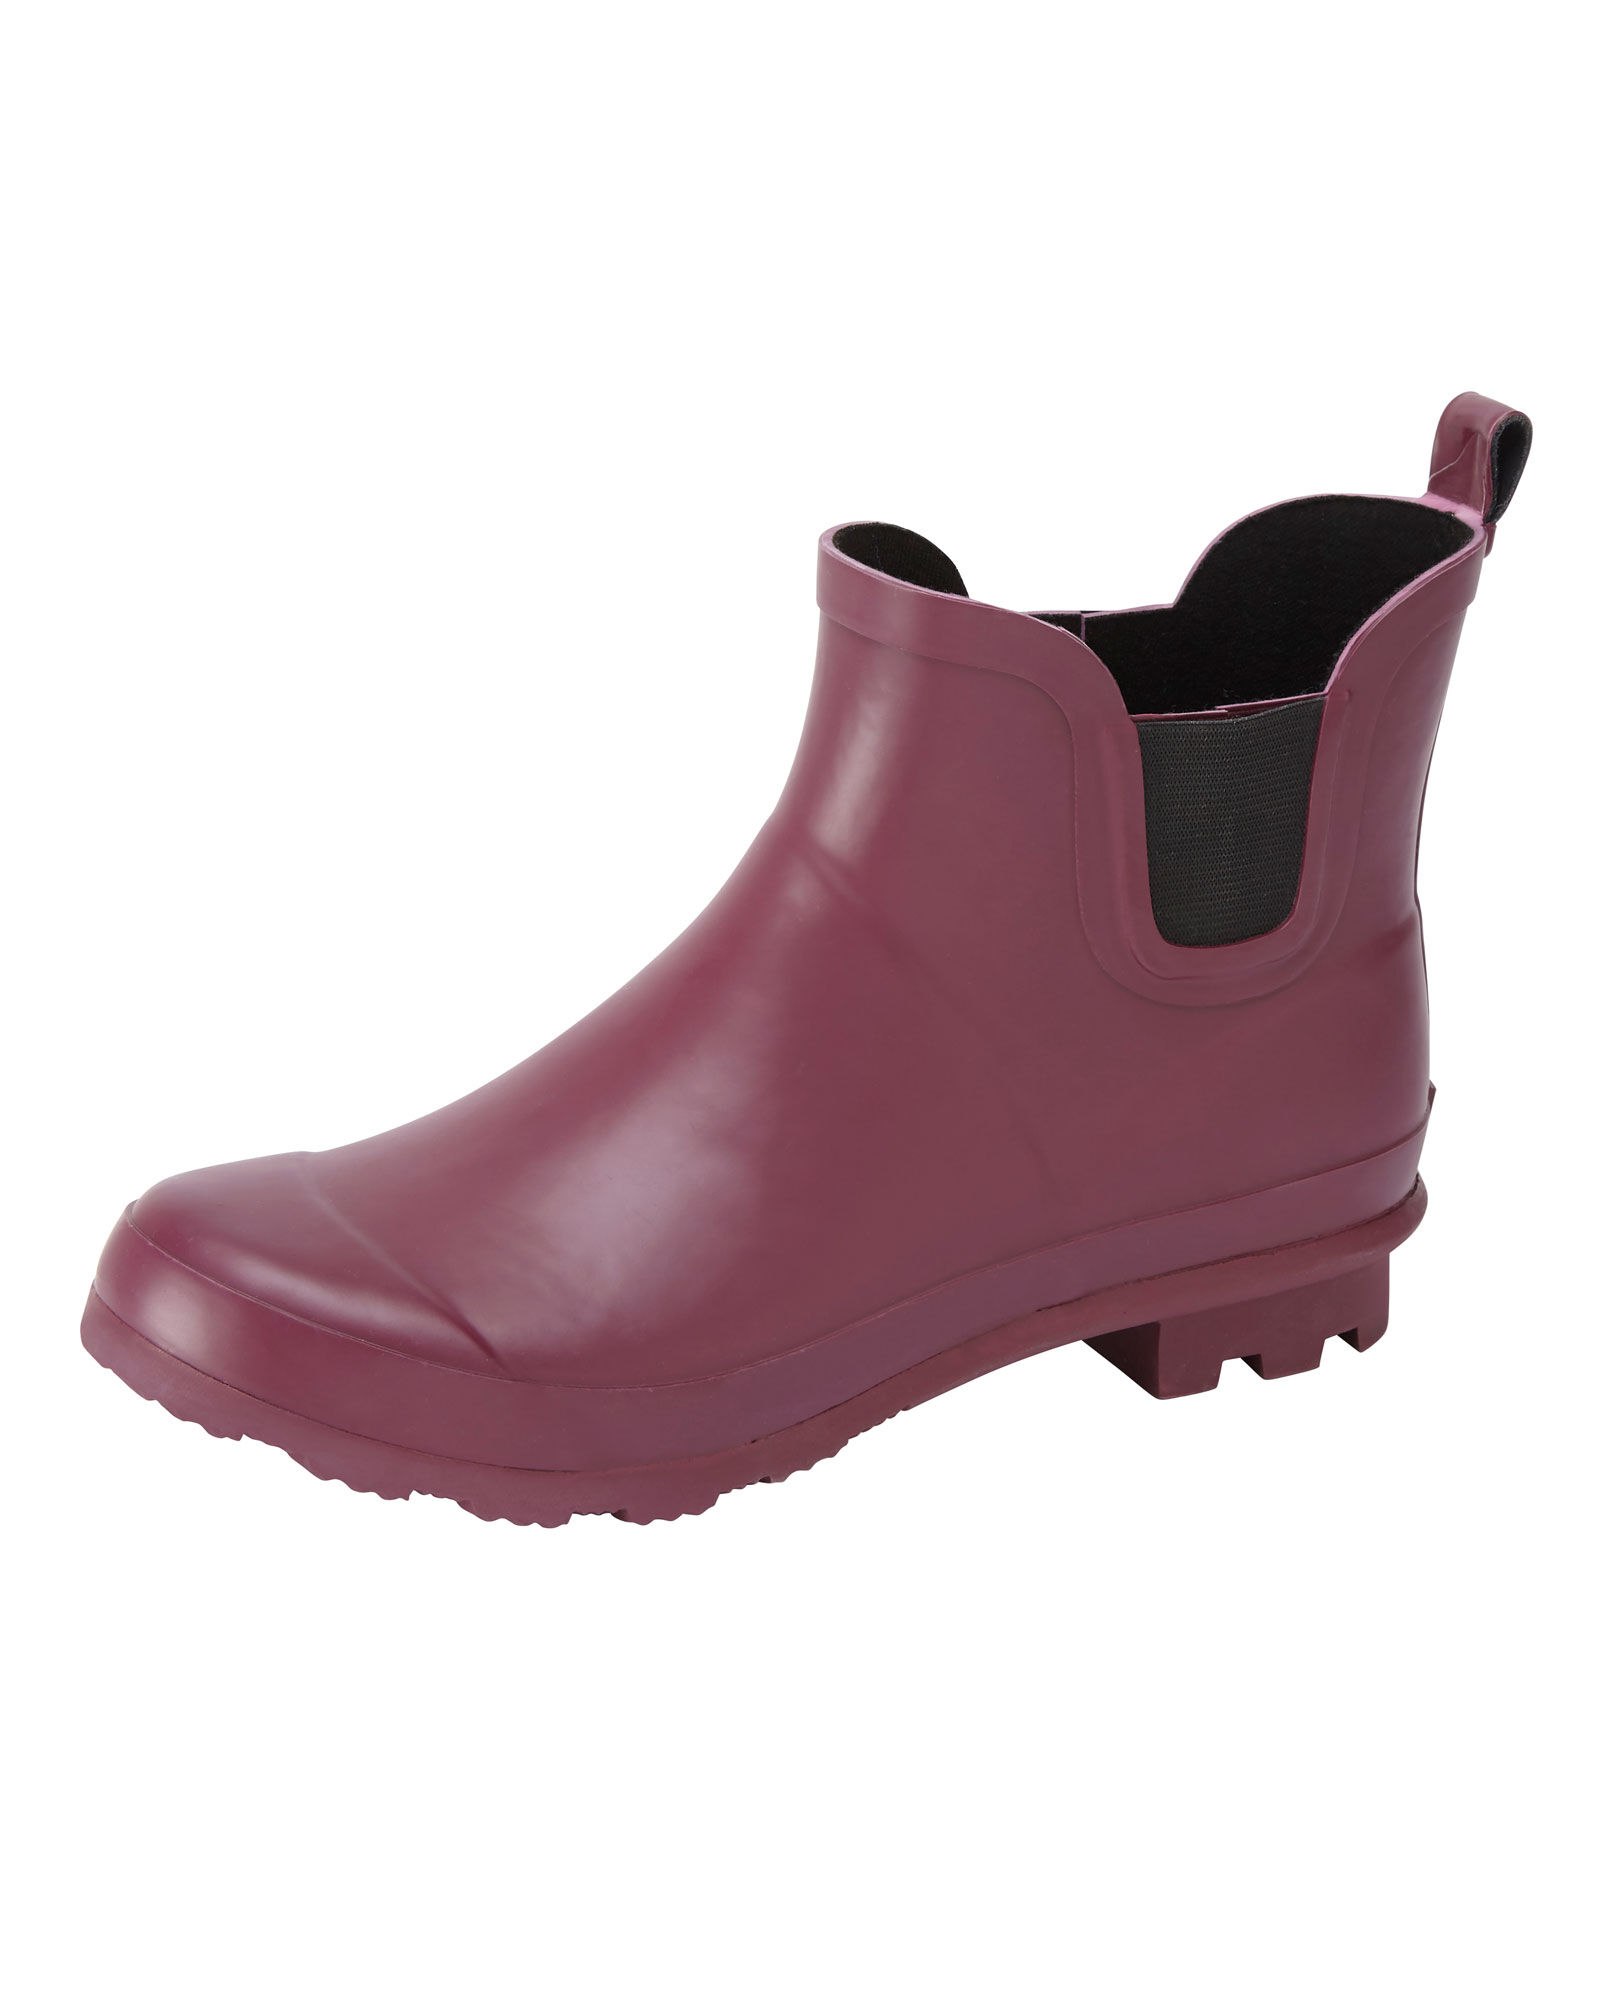 wellington boots for womens